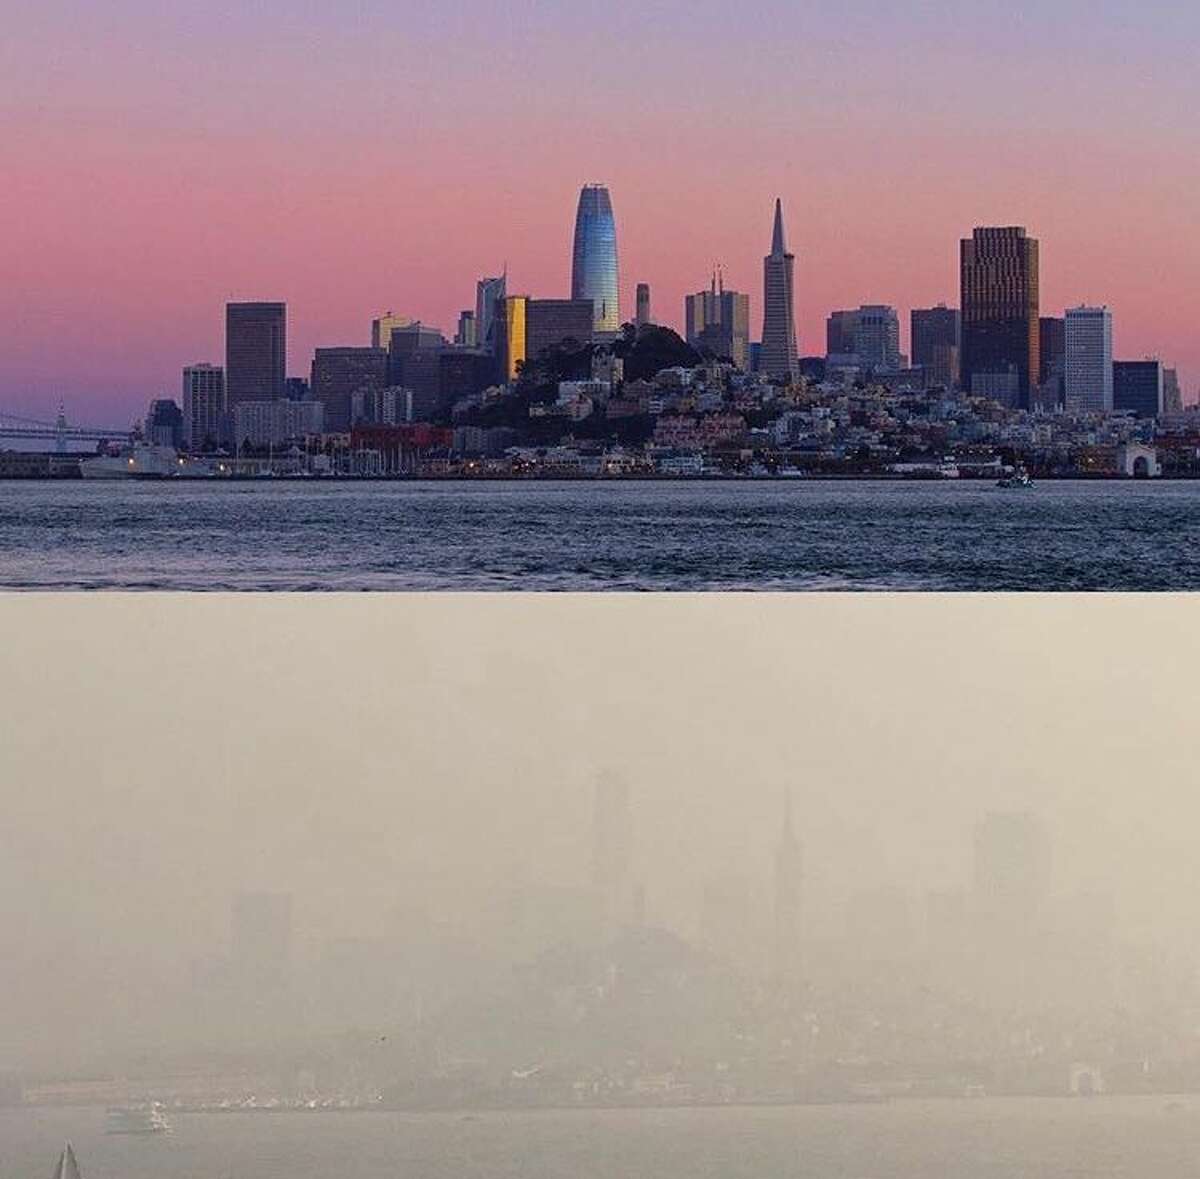 Marc Stokes shared this this combined photograph, taken a week apart, that show how thick the smoke currently is in the SF Bay Area. Unhealthy air conditions persist in the region caused by the smoke from the devastating Camp Fire.